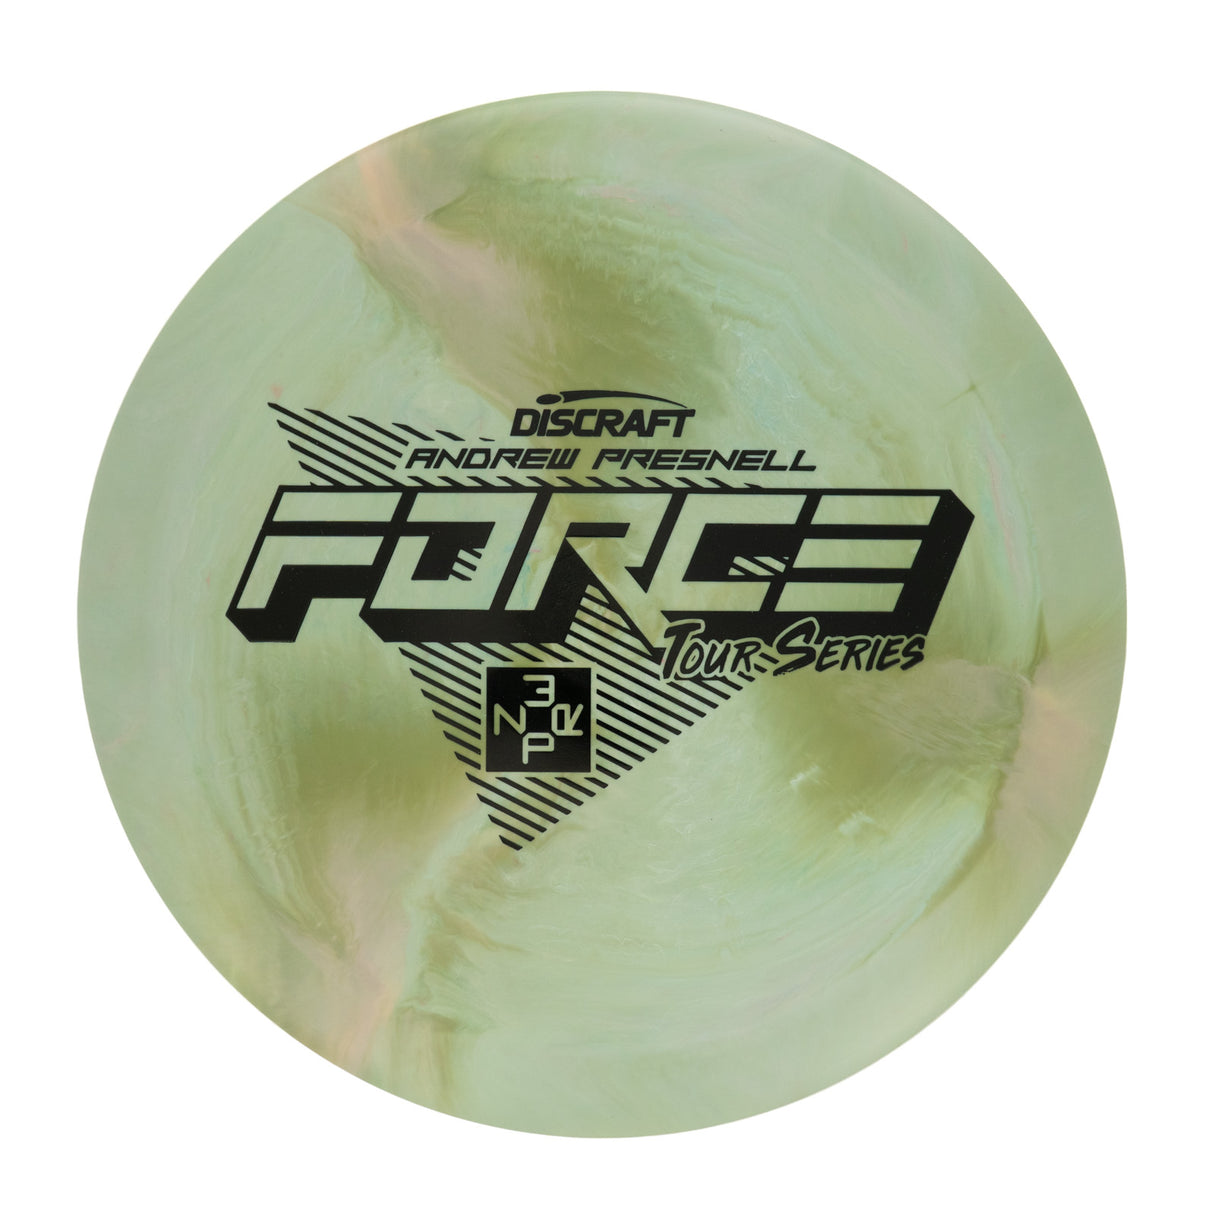 Discraft Force - Andrew Presnell Tour Series ESP 175g | Style 0001